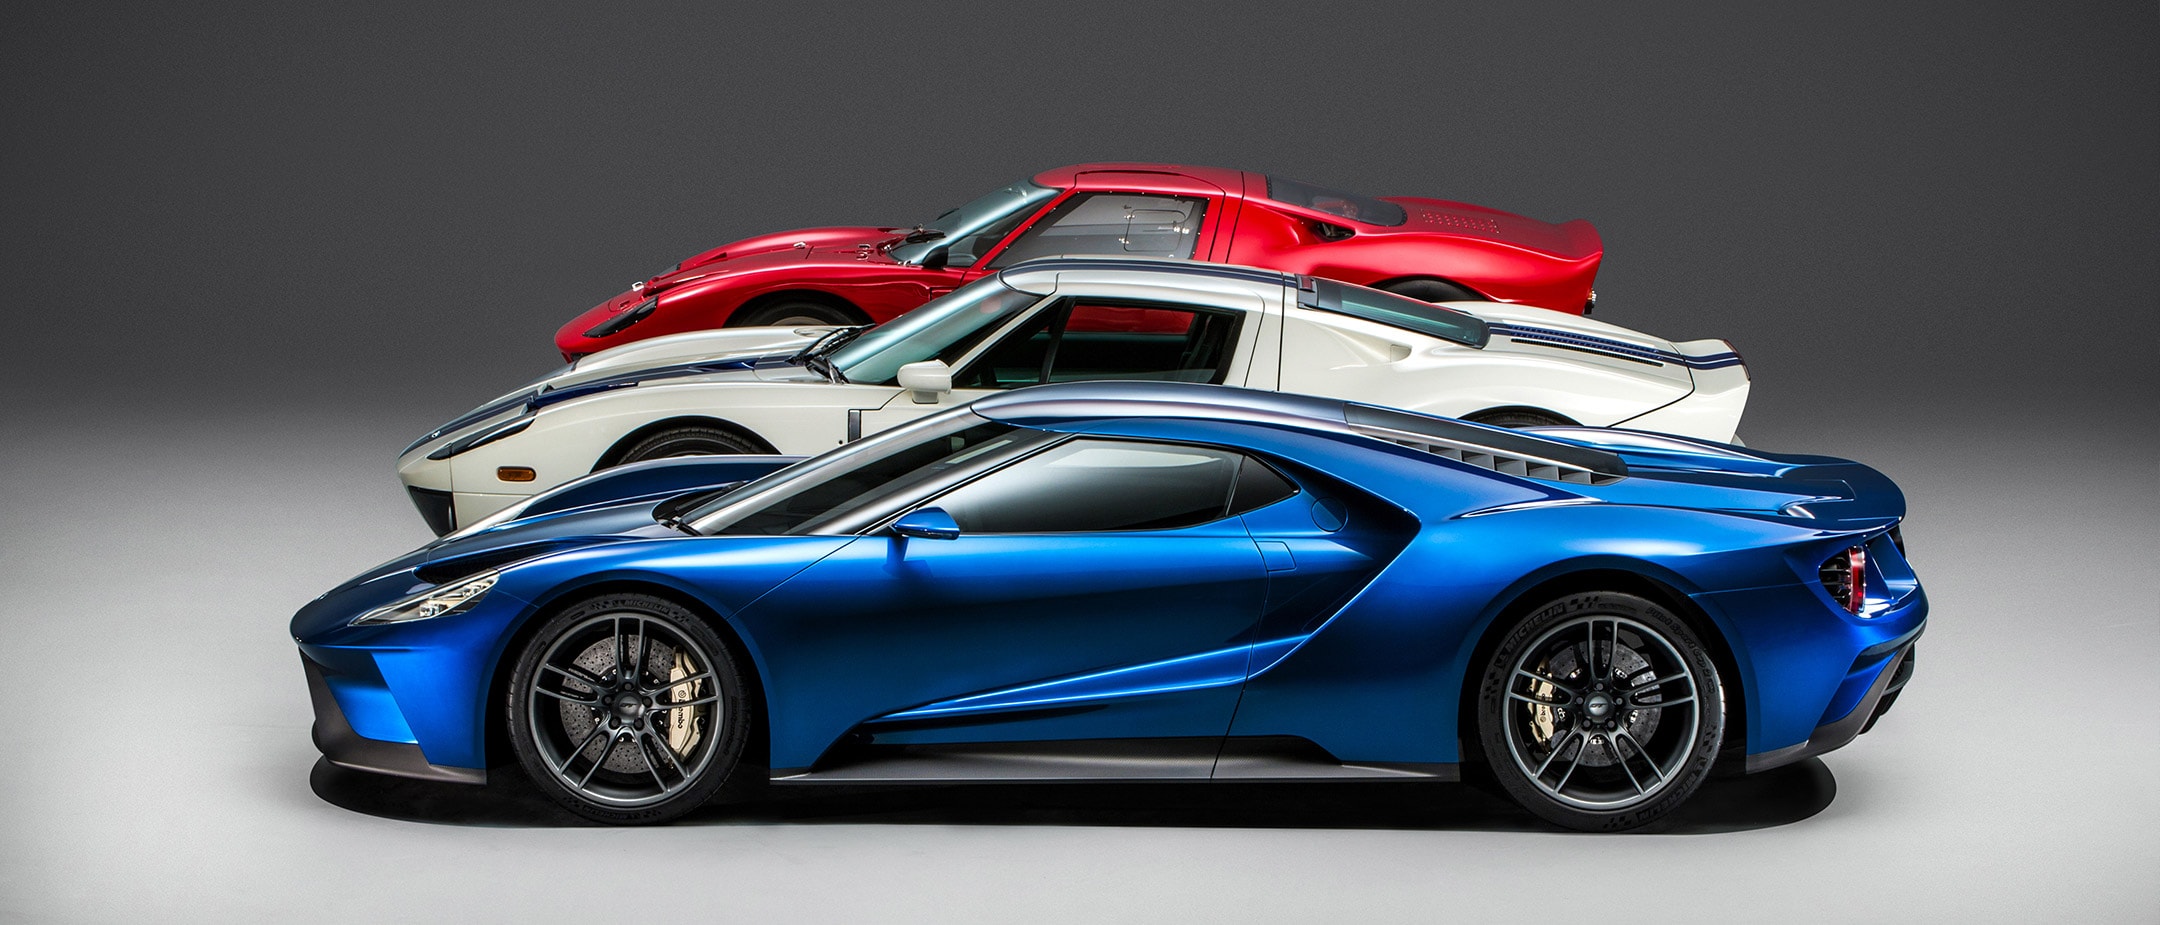 Ford GT generations blue 2016 model, white and red models